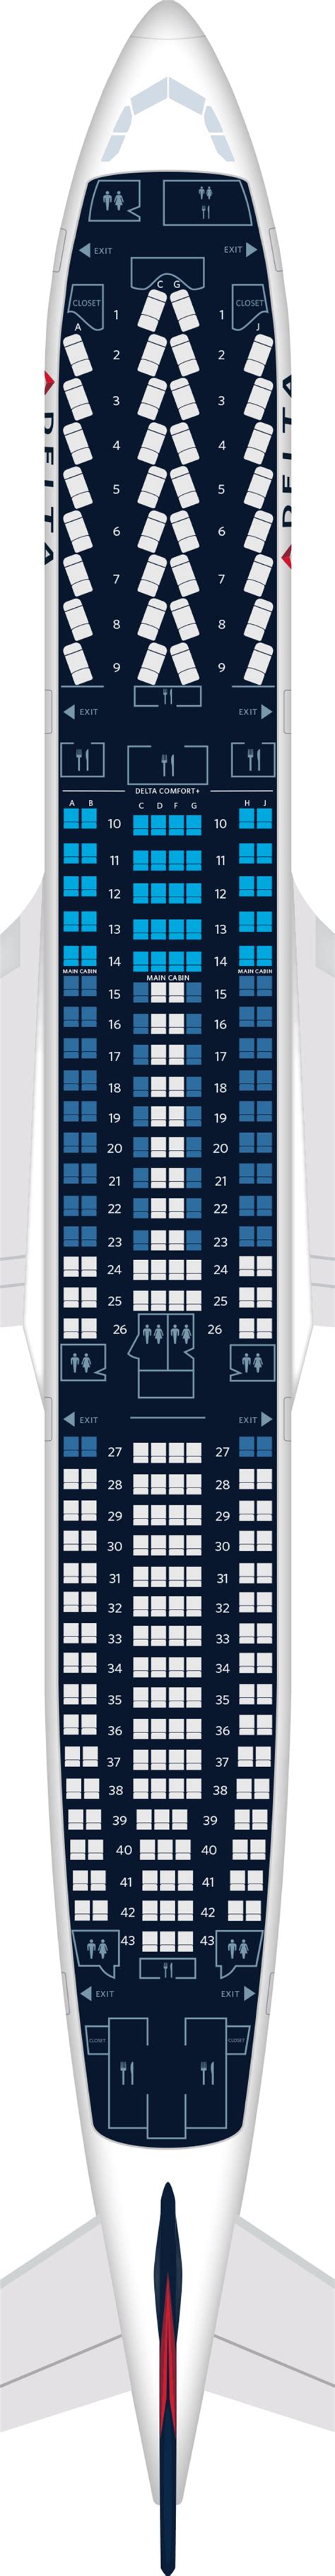 Airbus A330 Seating Chart